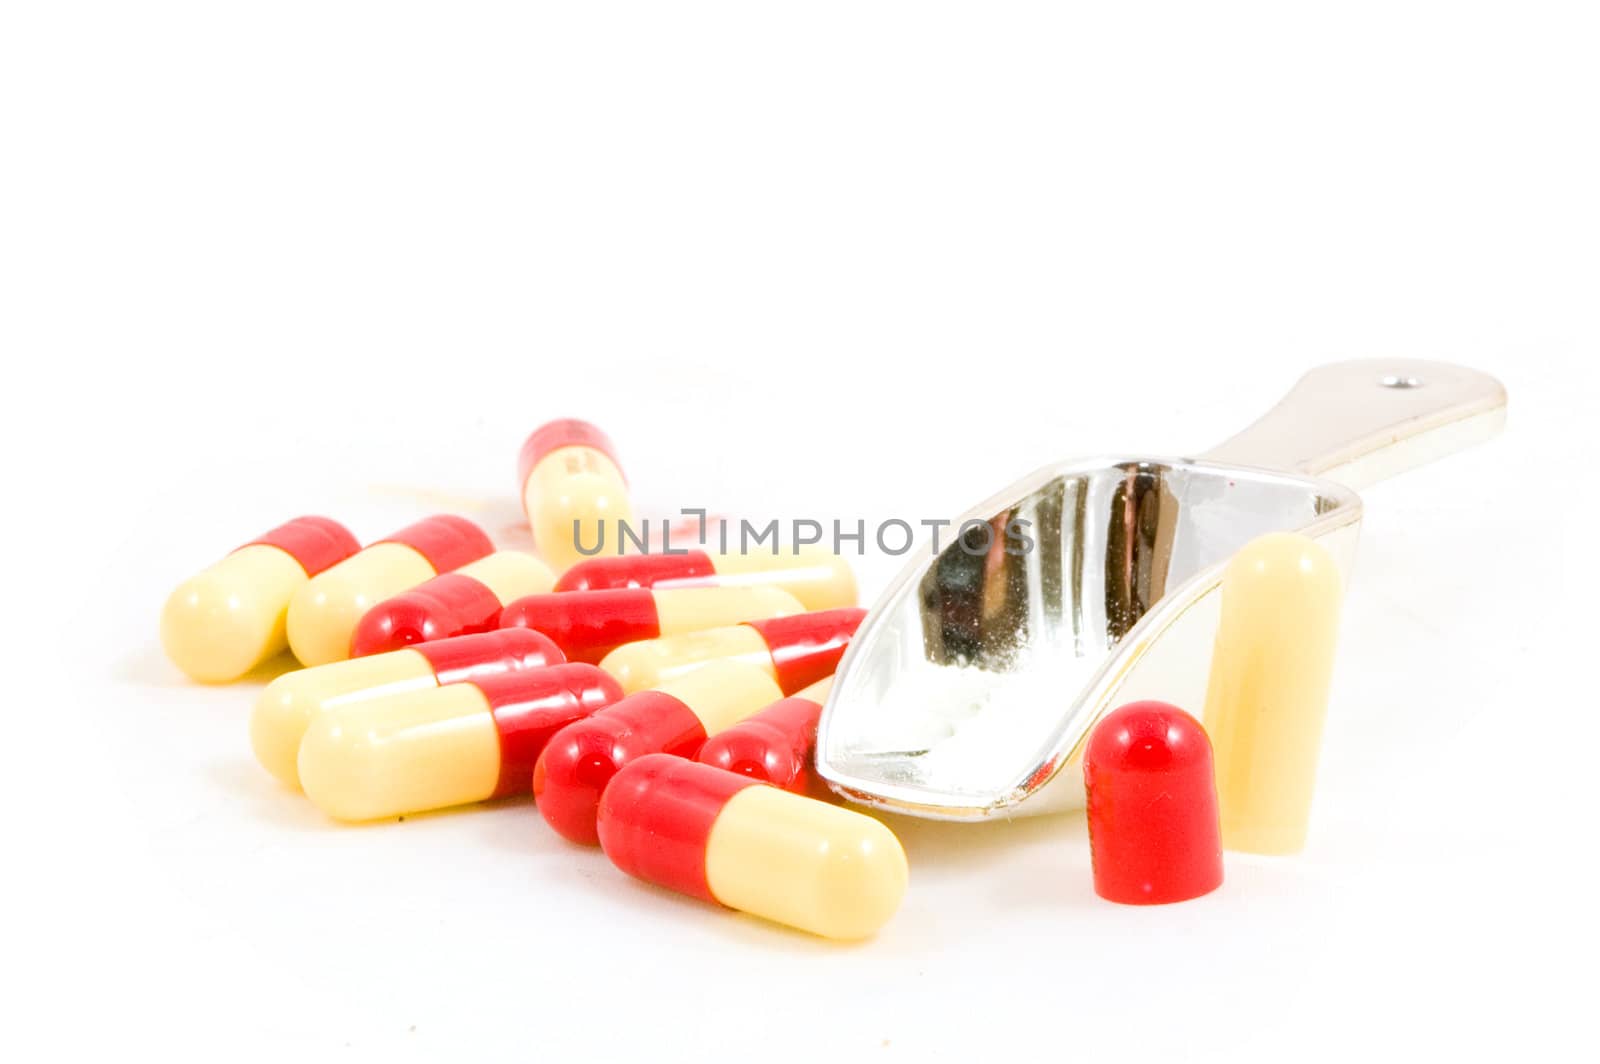 Pills with measure scoop on a white background by ladyminnie